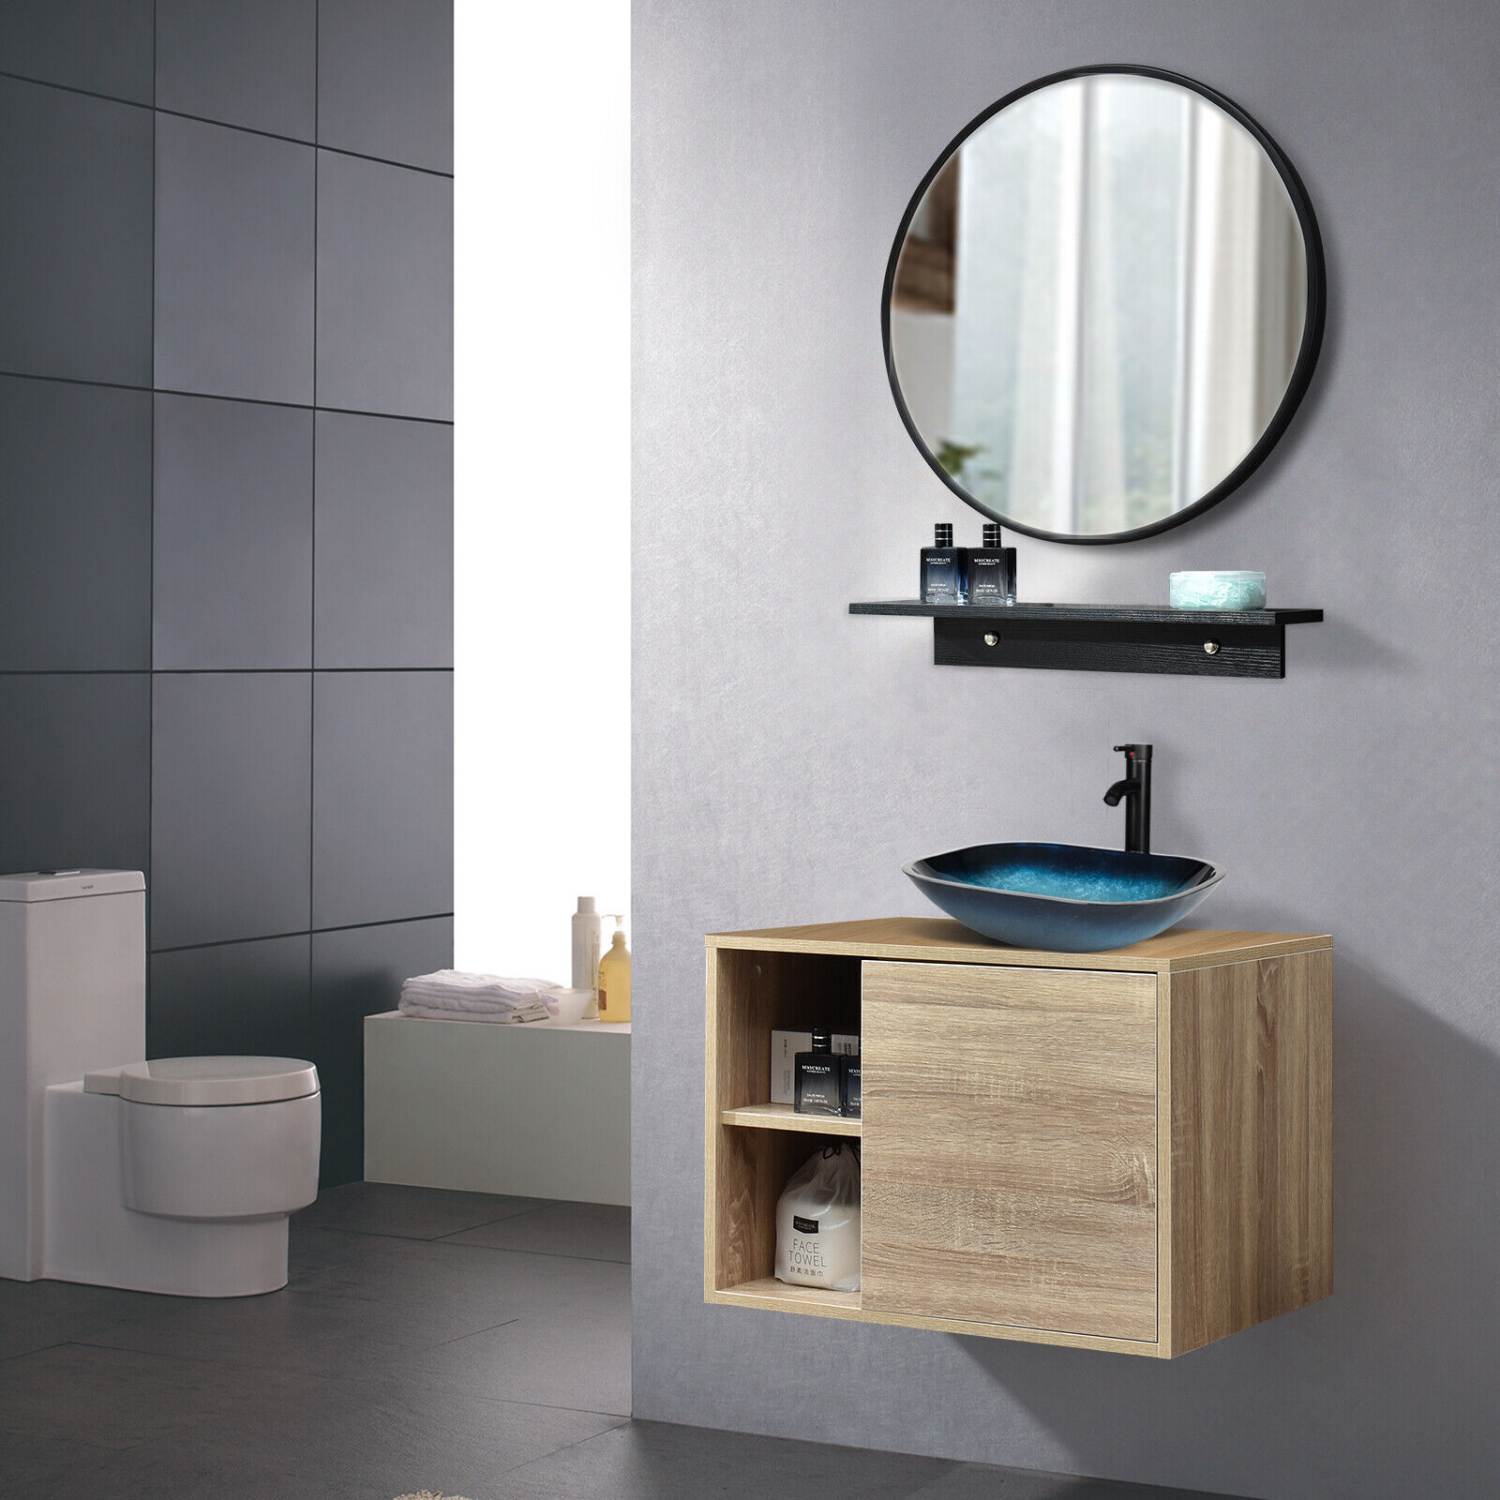 Elecwish natural Wall Mounted Cabinet with Square Blue Sink Combo US-BV1004 bathroom scene